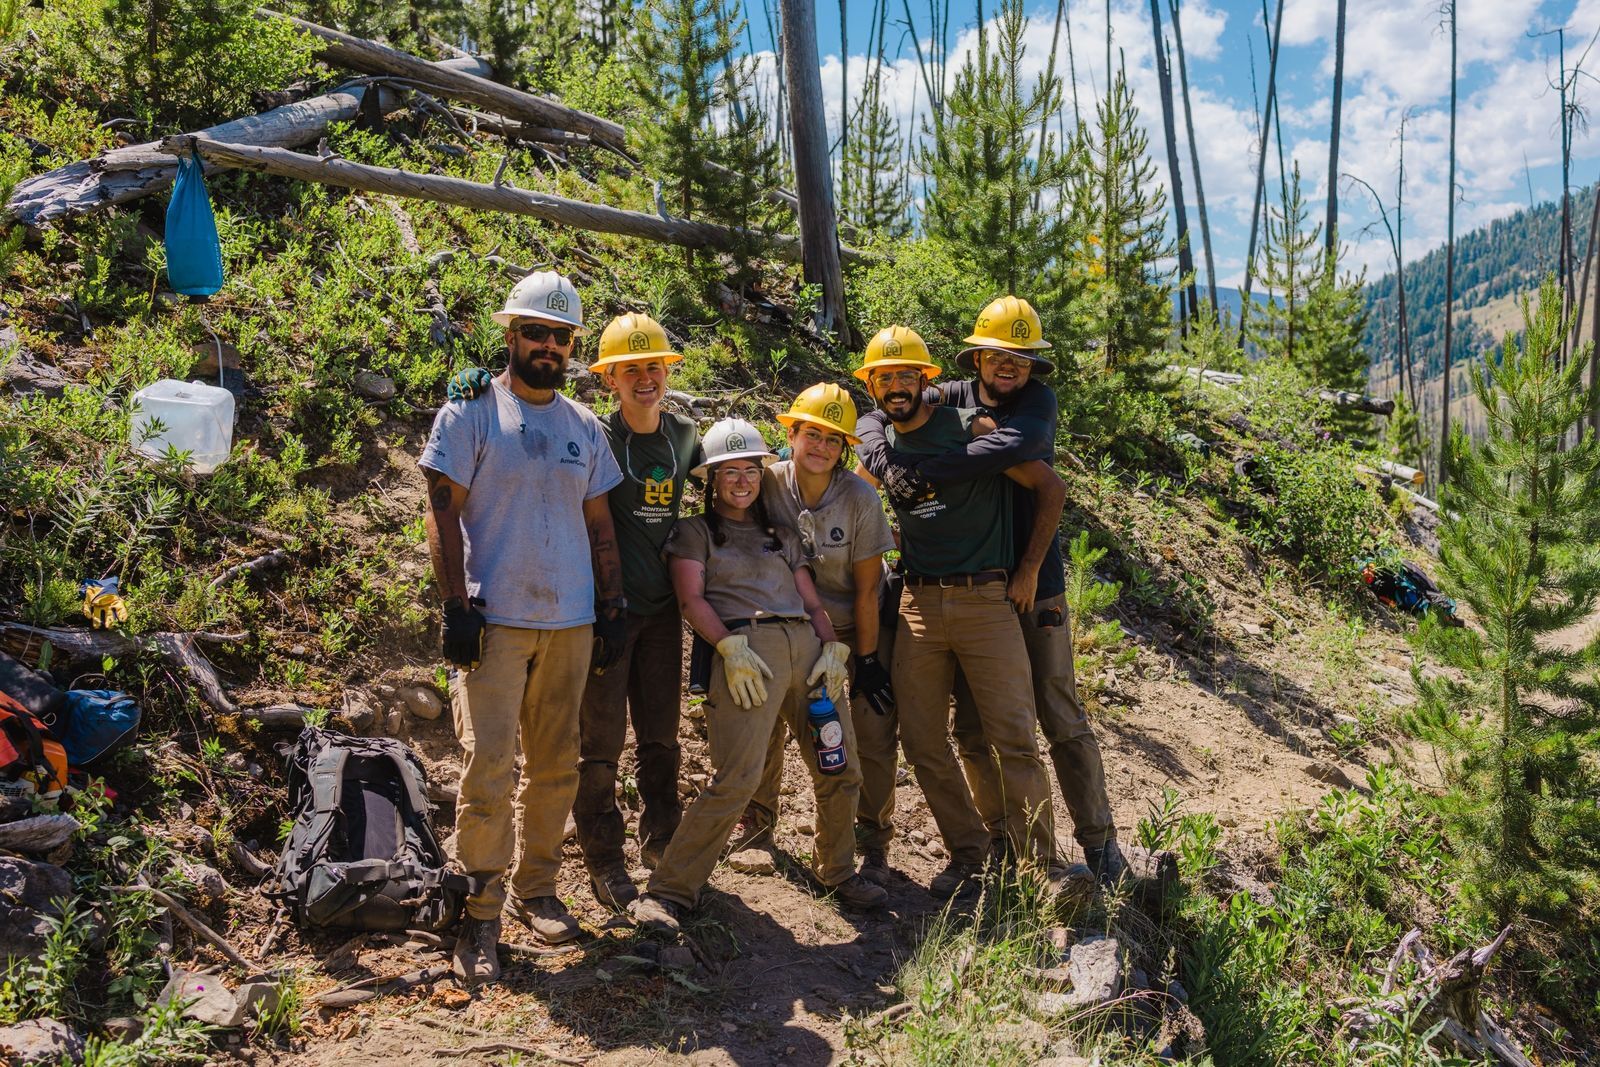 [Image Description: Four MCC members and two leaders pose together on a trail they are working on, smiling and wearing their MCC uniforms and hard hats.]